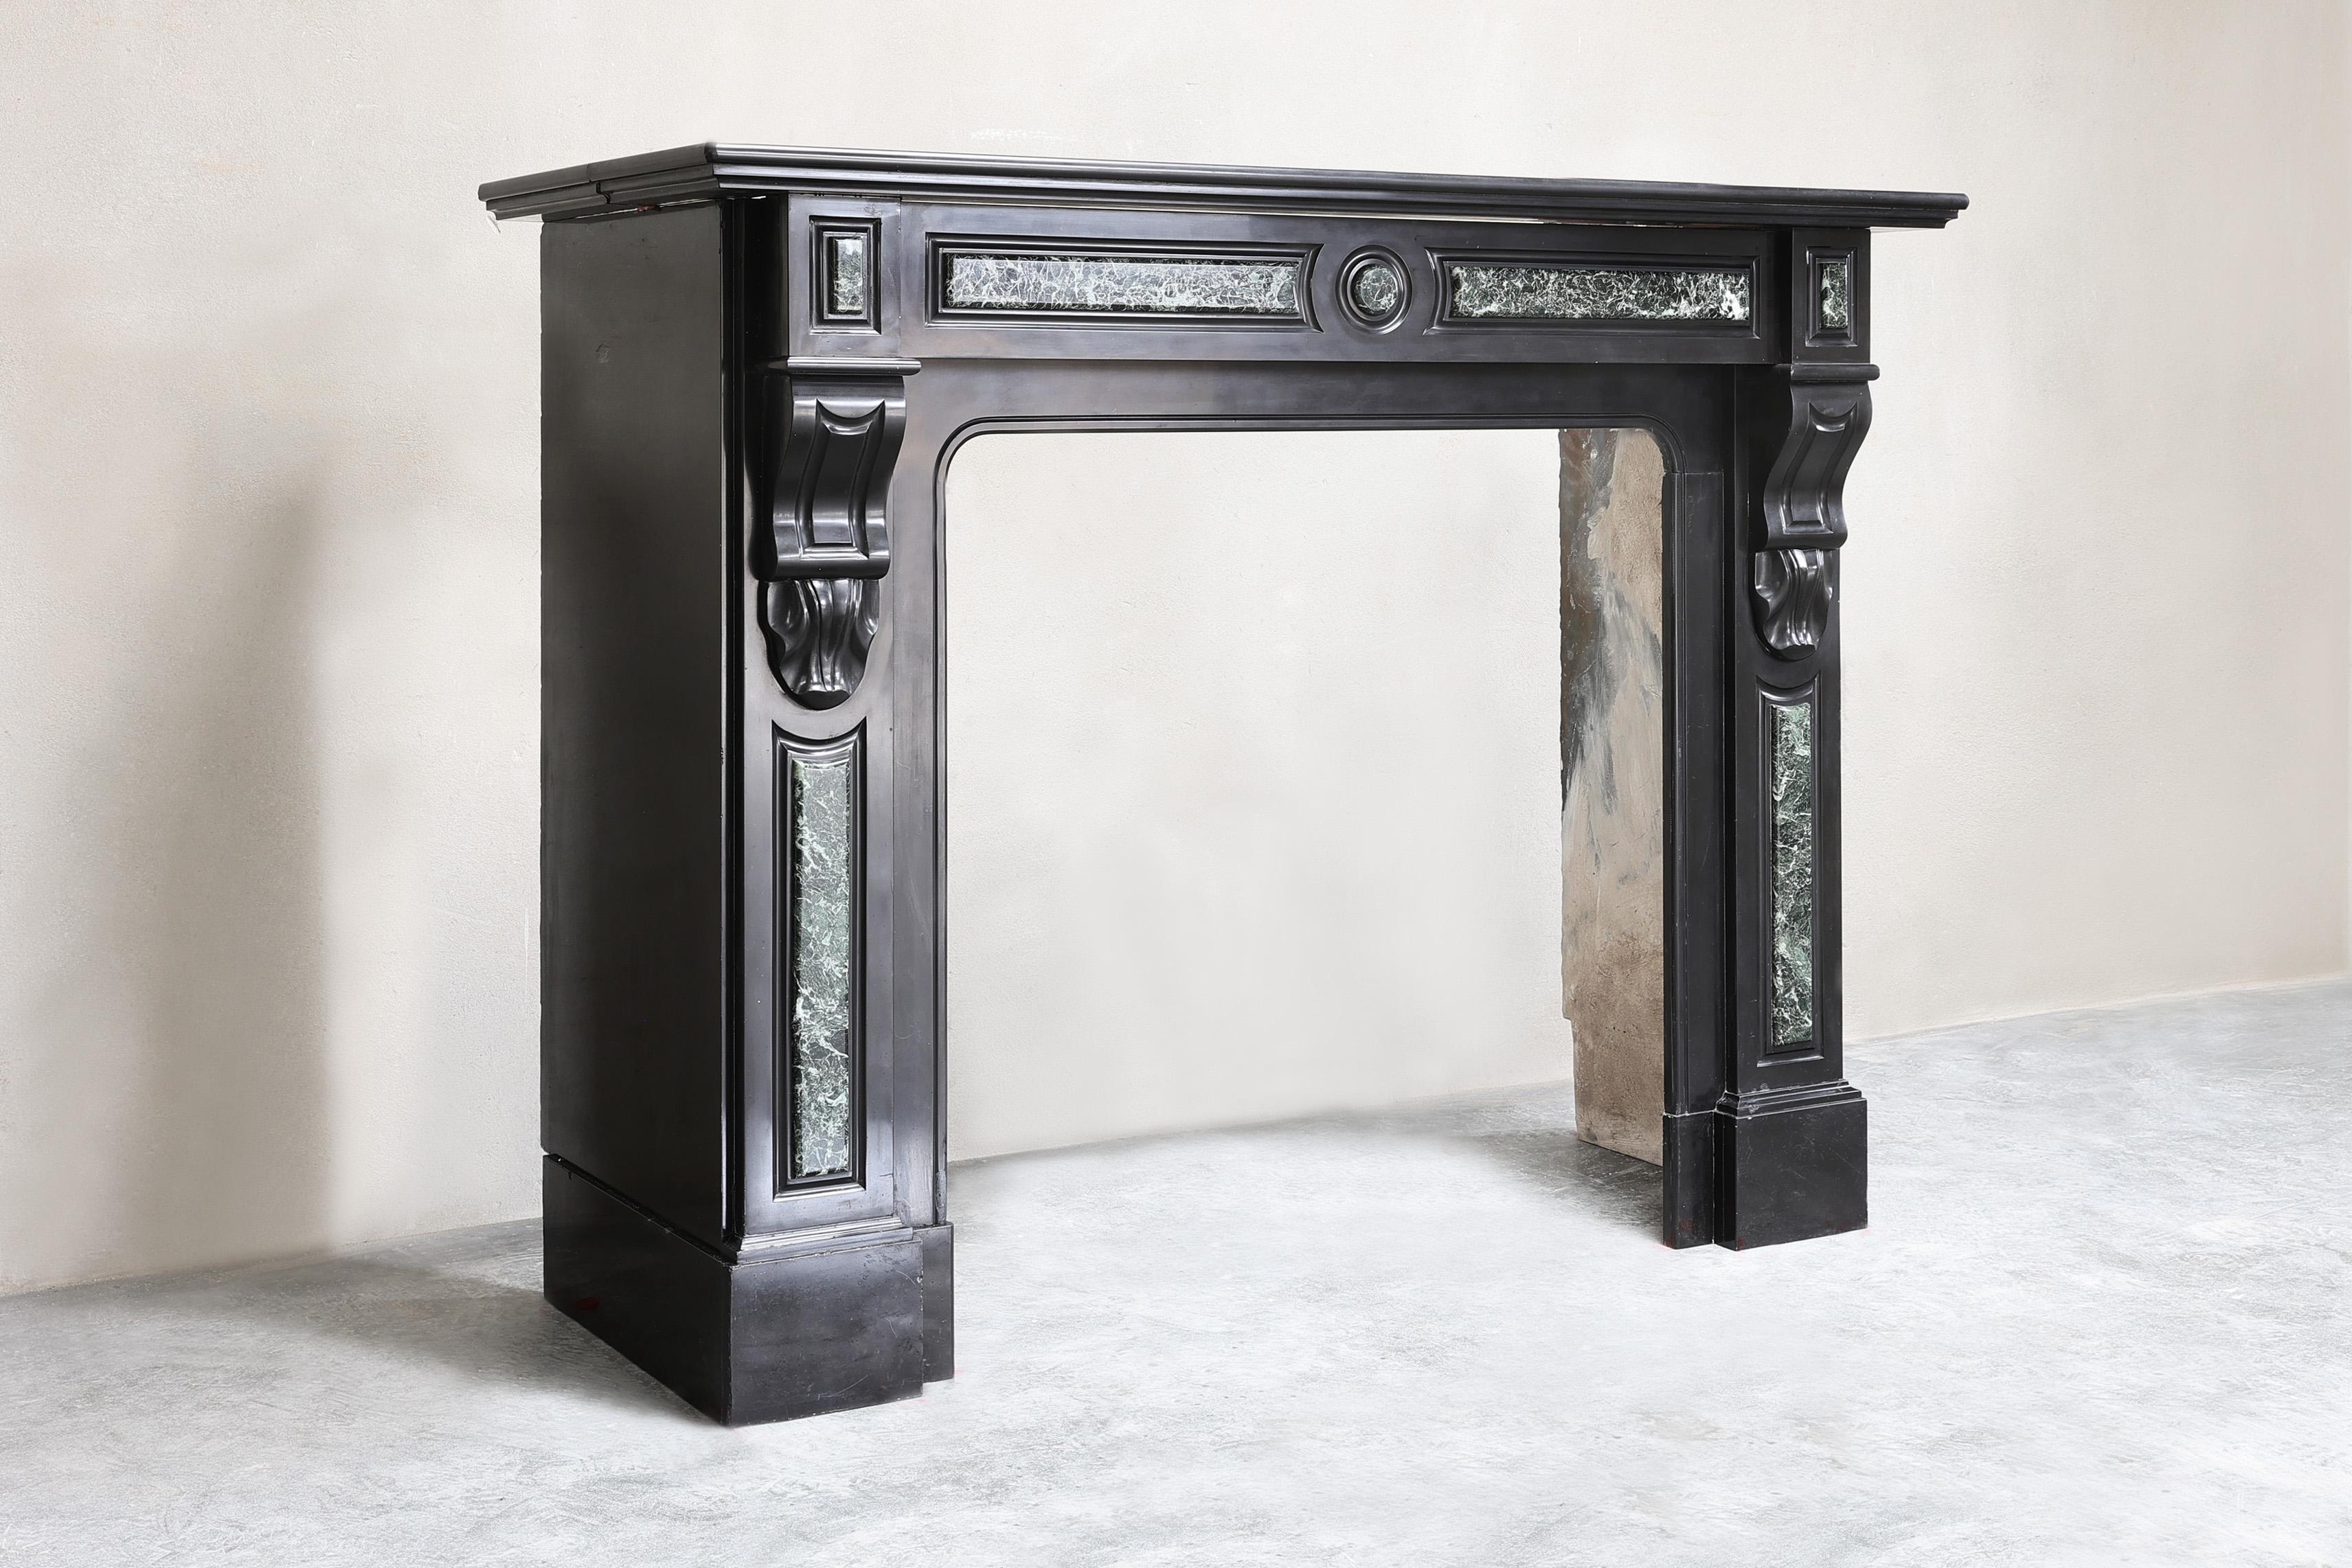 Beautiful antique mantelpiece made of Noir de Mazy marble combined with green marble. This mantle dates from the 19th century and is in the style of Louis XVI. A compact mantelpiece due to its size that can be used in many interiors.